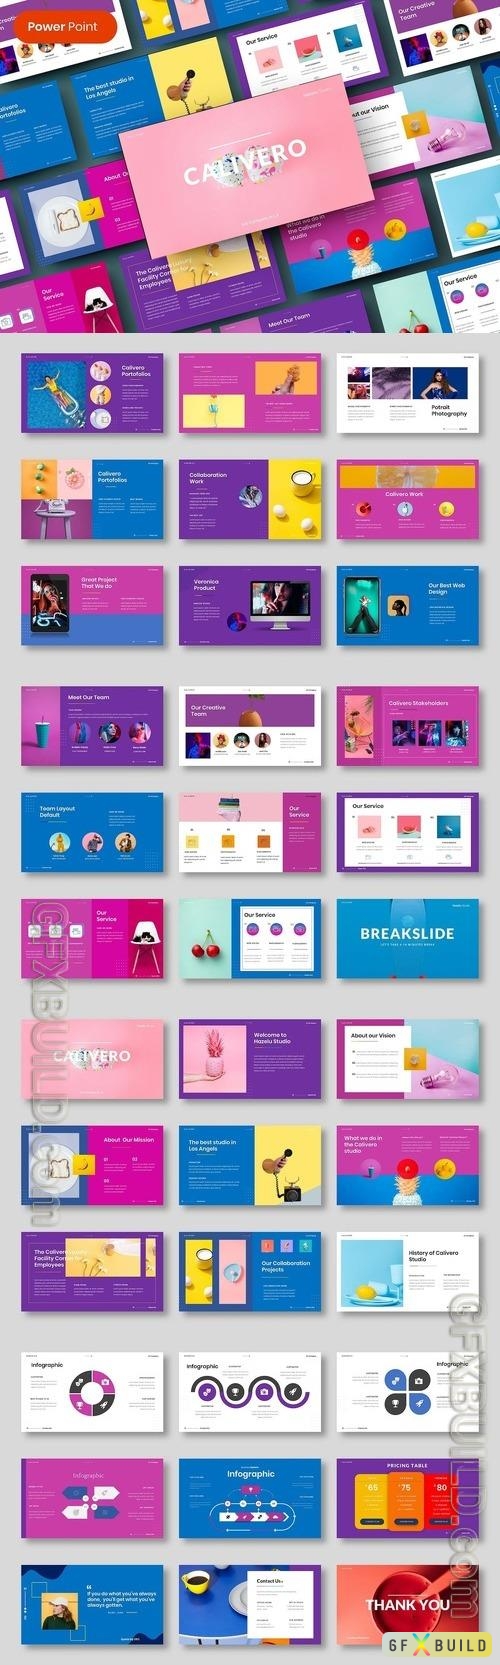 Calivero – Creative Business PowerPoint Template